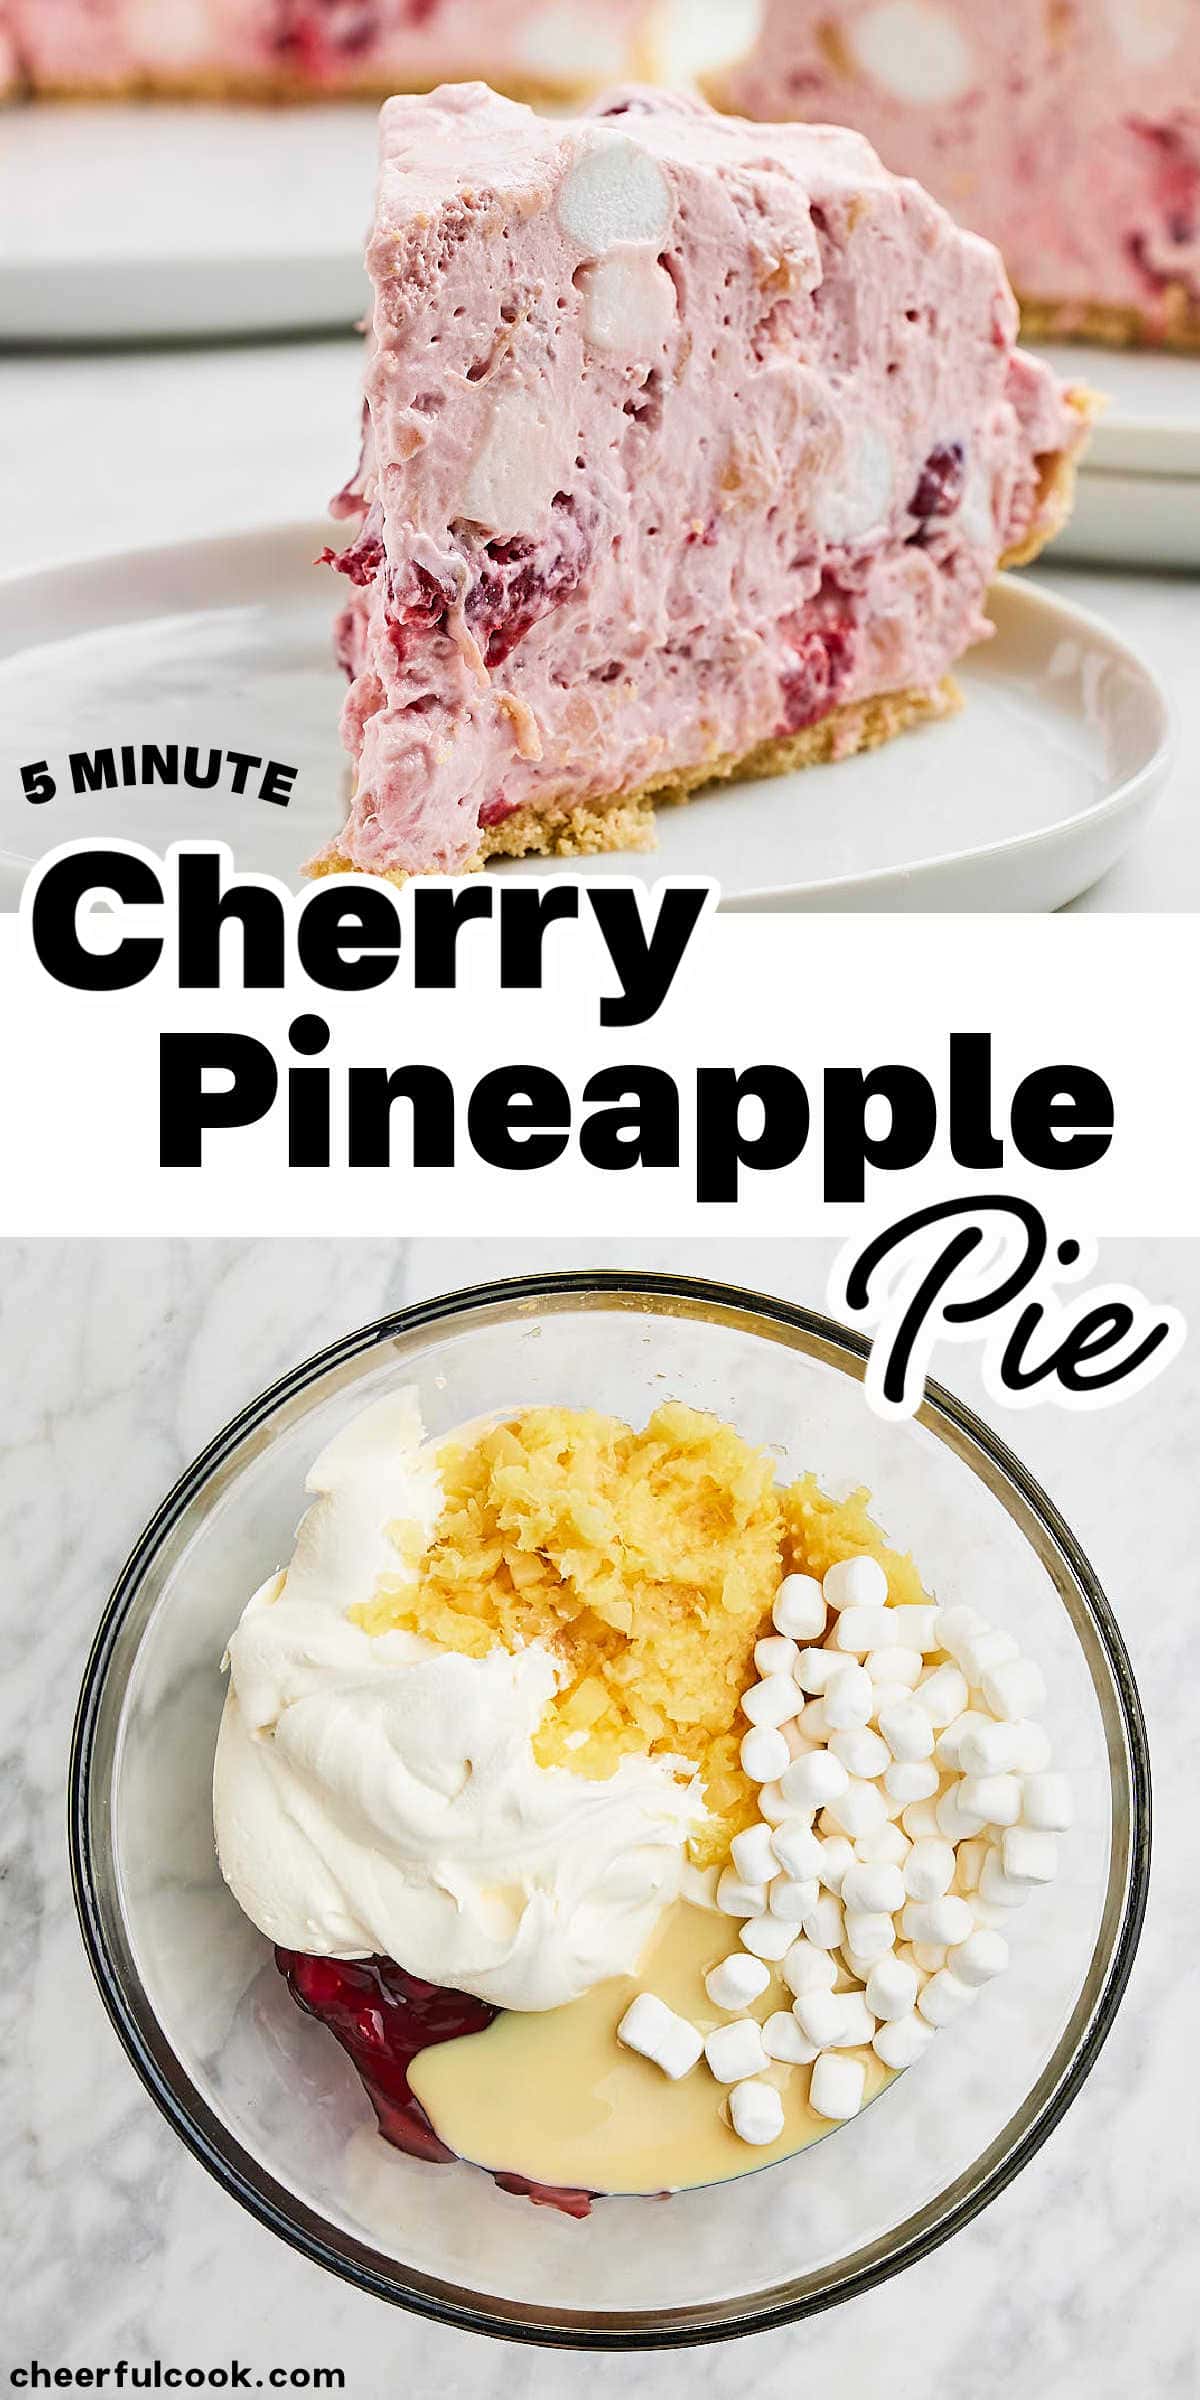 "Craving a sweet and easy dessert? Look no further than our irresistible Cherry Pineapple Pie! Indulge in the mouthwatering combination of cherry pie filling, pineapple chunks, creamy condensed milk, and fluffy marshmallows. 🍒🍍😋 #cheerfulcook #CherryPineapplePie #EasyDessert #SweetTreat #EasyRecipe #nobakepie via @cheerfulcook